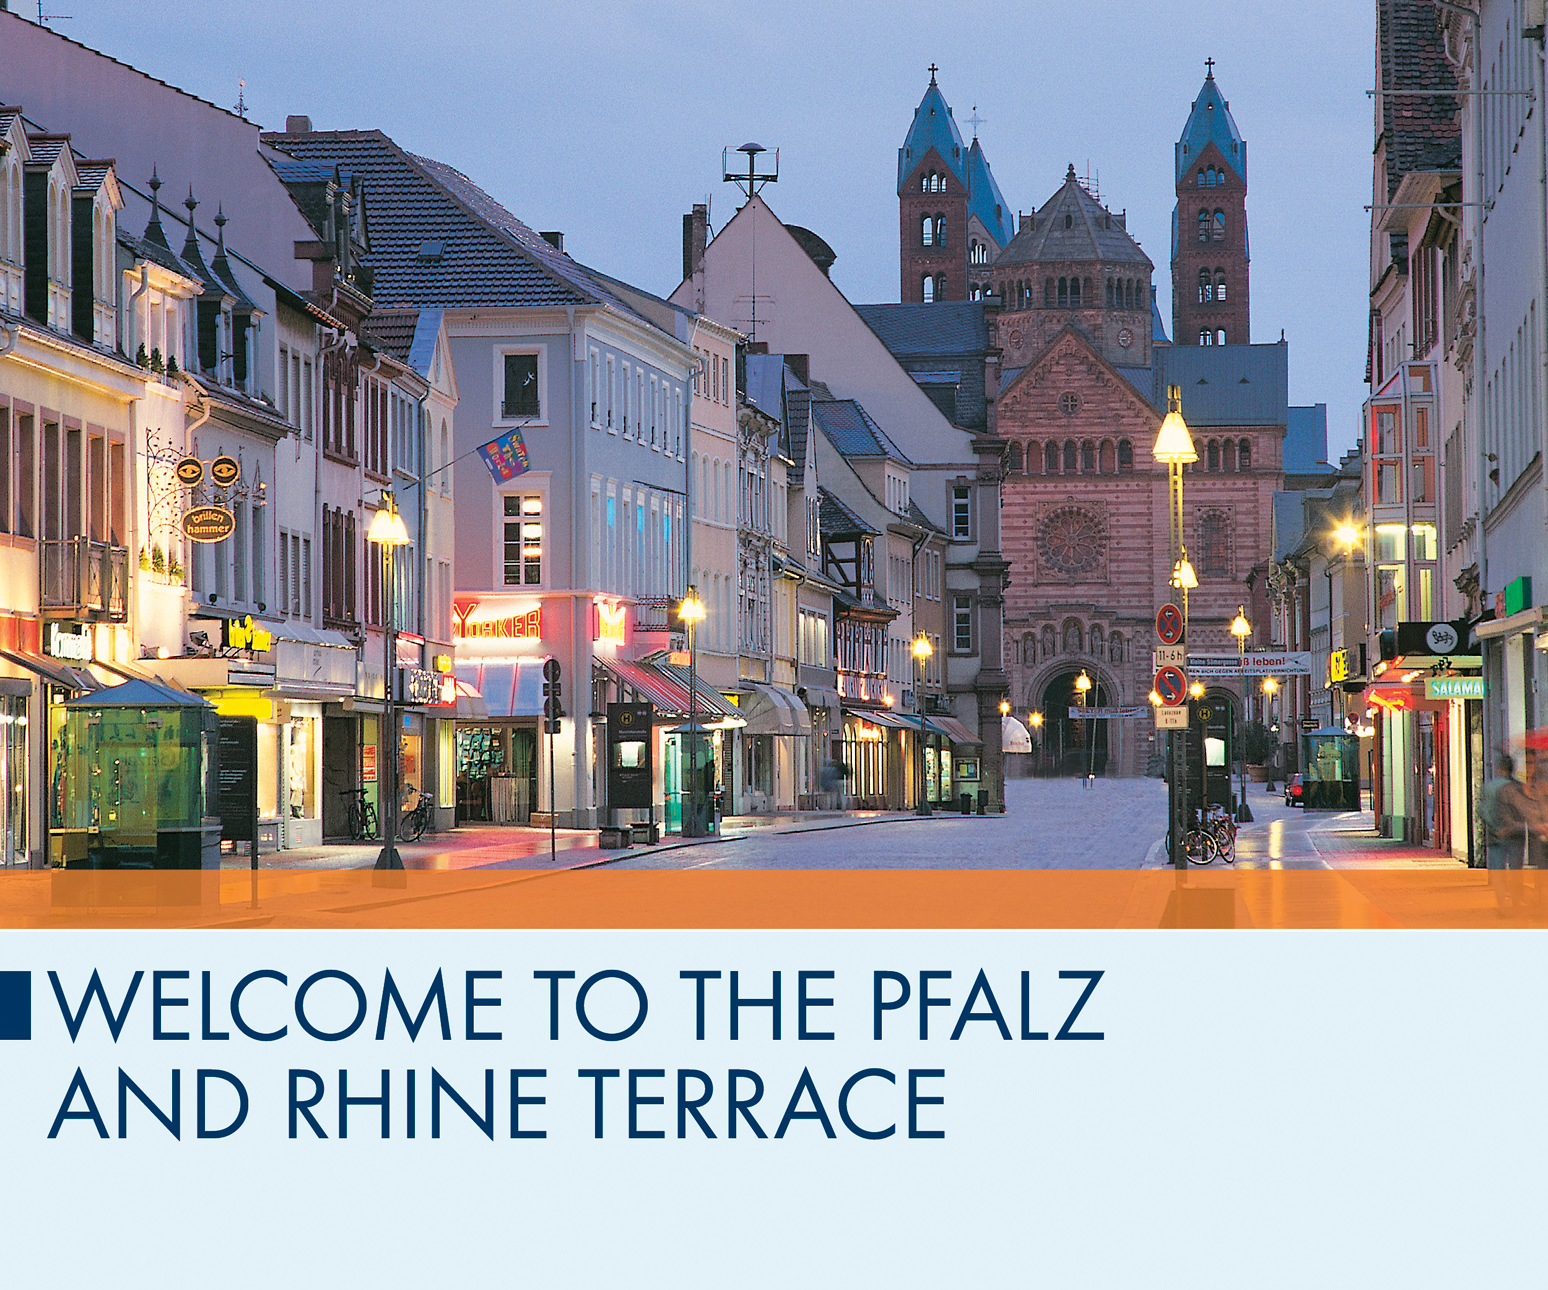 Welcome to the Pfalz and Rhine Terrace